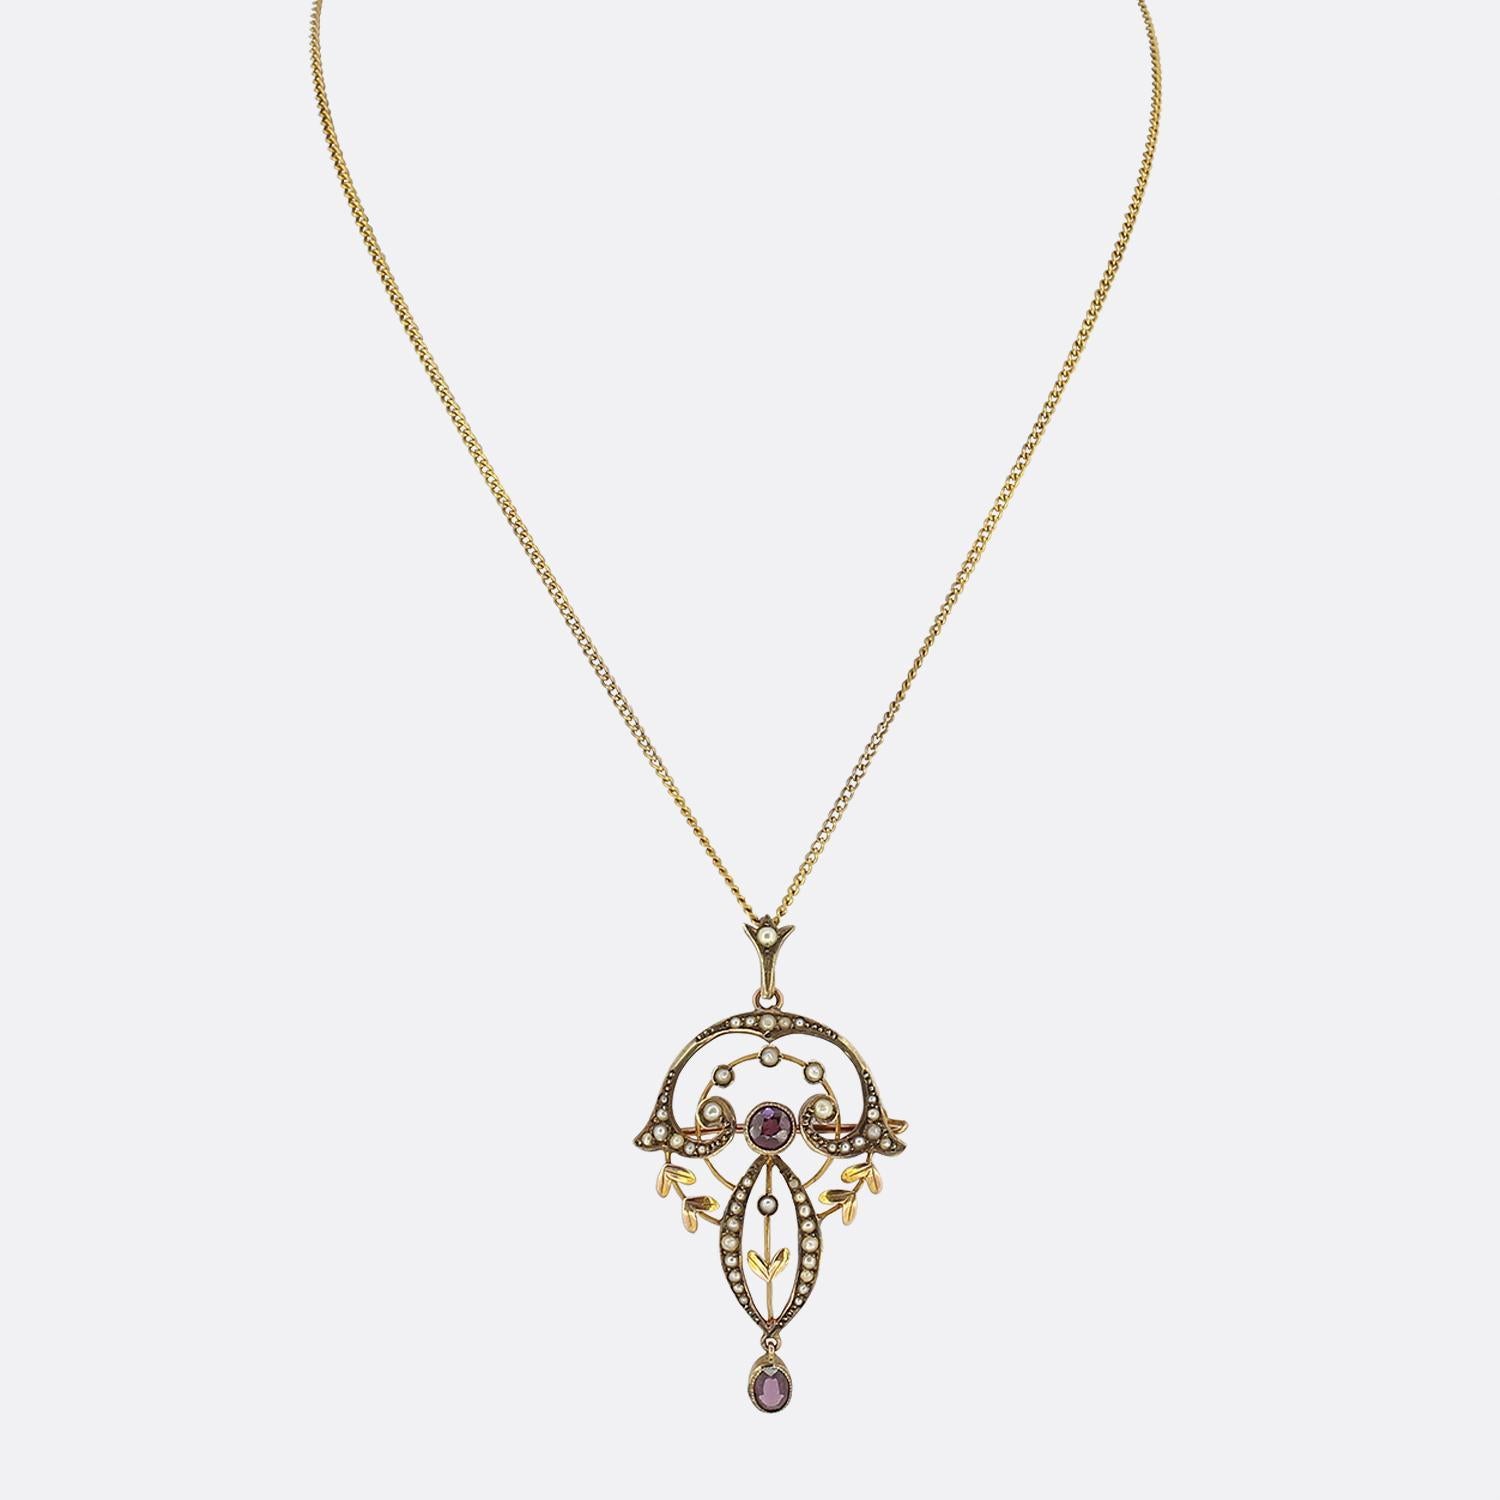 This is an antique Art Nouveau garnet and pearl pendant necklace. It has been set with a central garnet which is surrounded by multiple seed pearls along with an oval cut garnet drop in a 9ct yellow gold setting. The necklace has been suspended on a